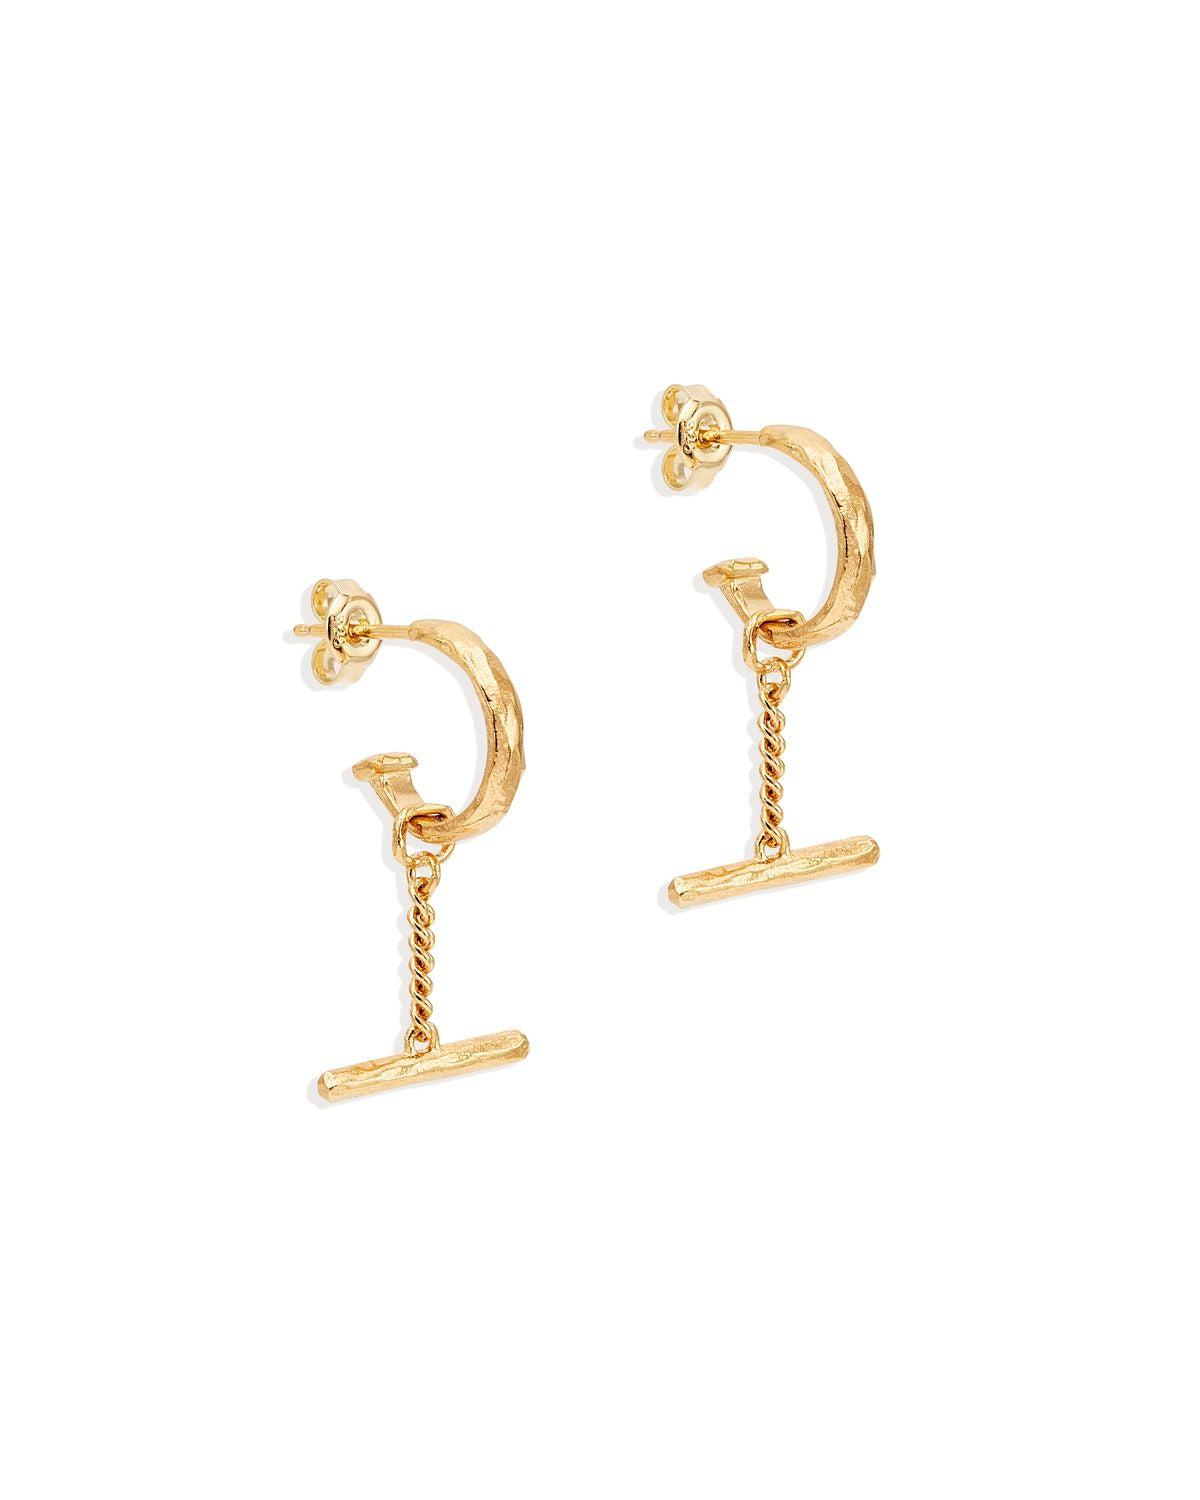 By Charlotte Battered Chain Fob Earrings, Gold